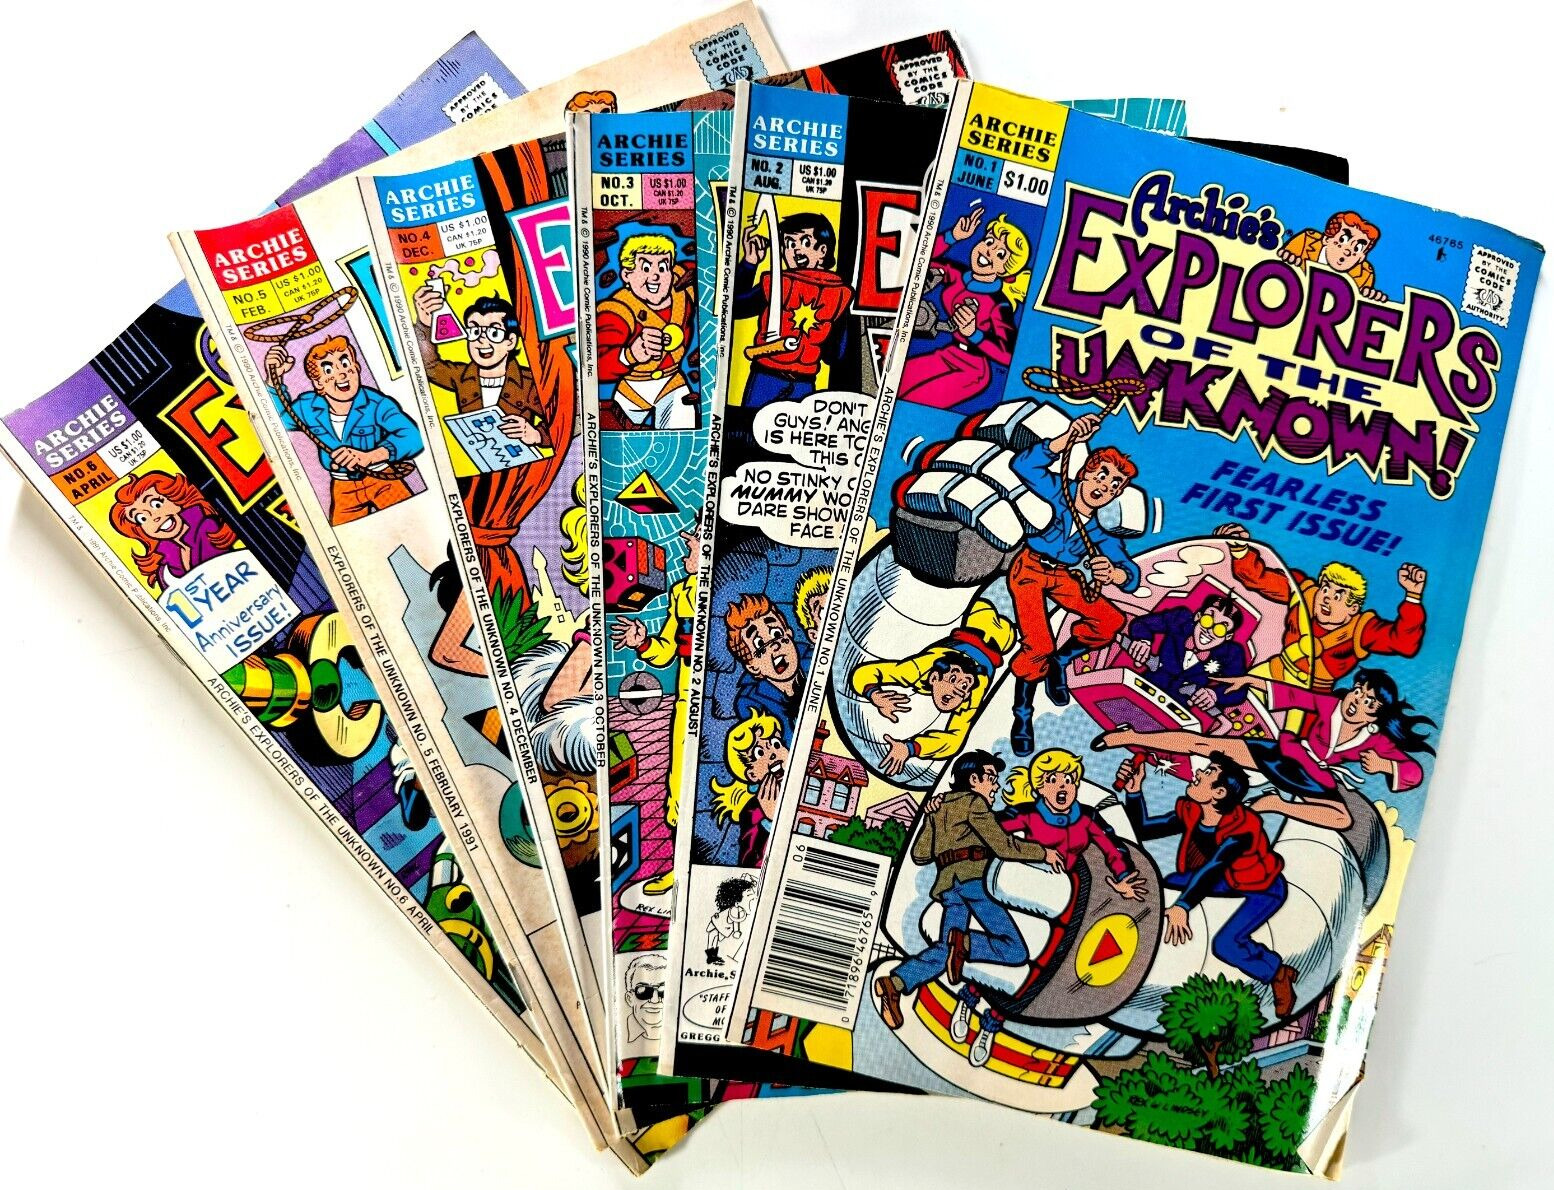 Archie Series ARCHIE\'S EXPLORERS OF THE UNKNOWN (1990-91) #1-6 FN Ships FREE